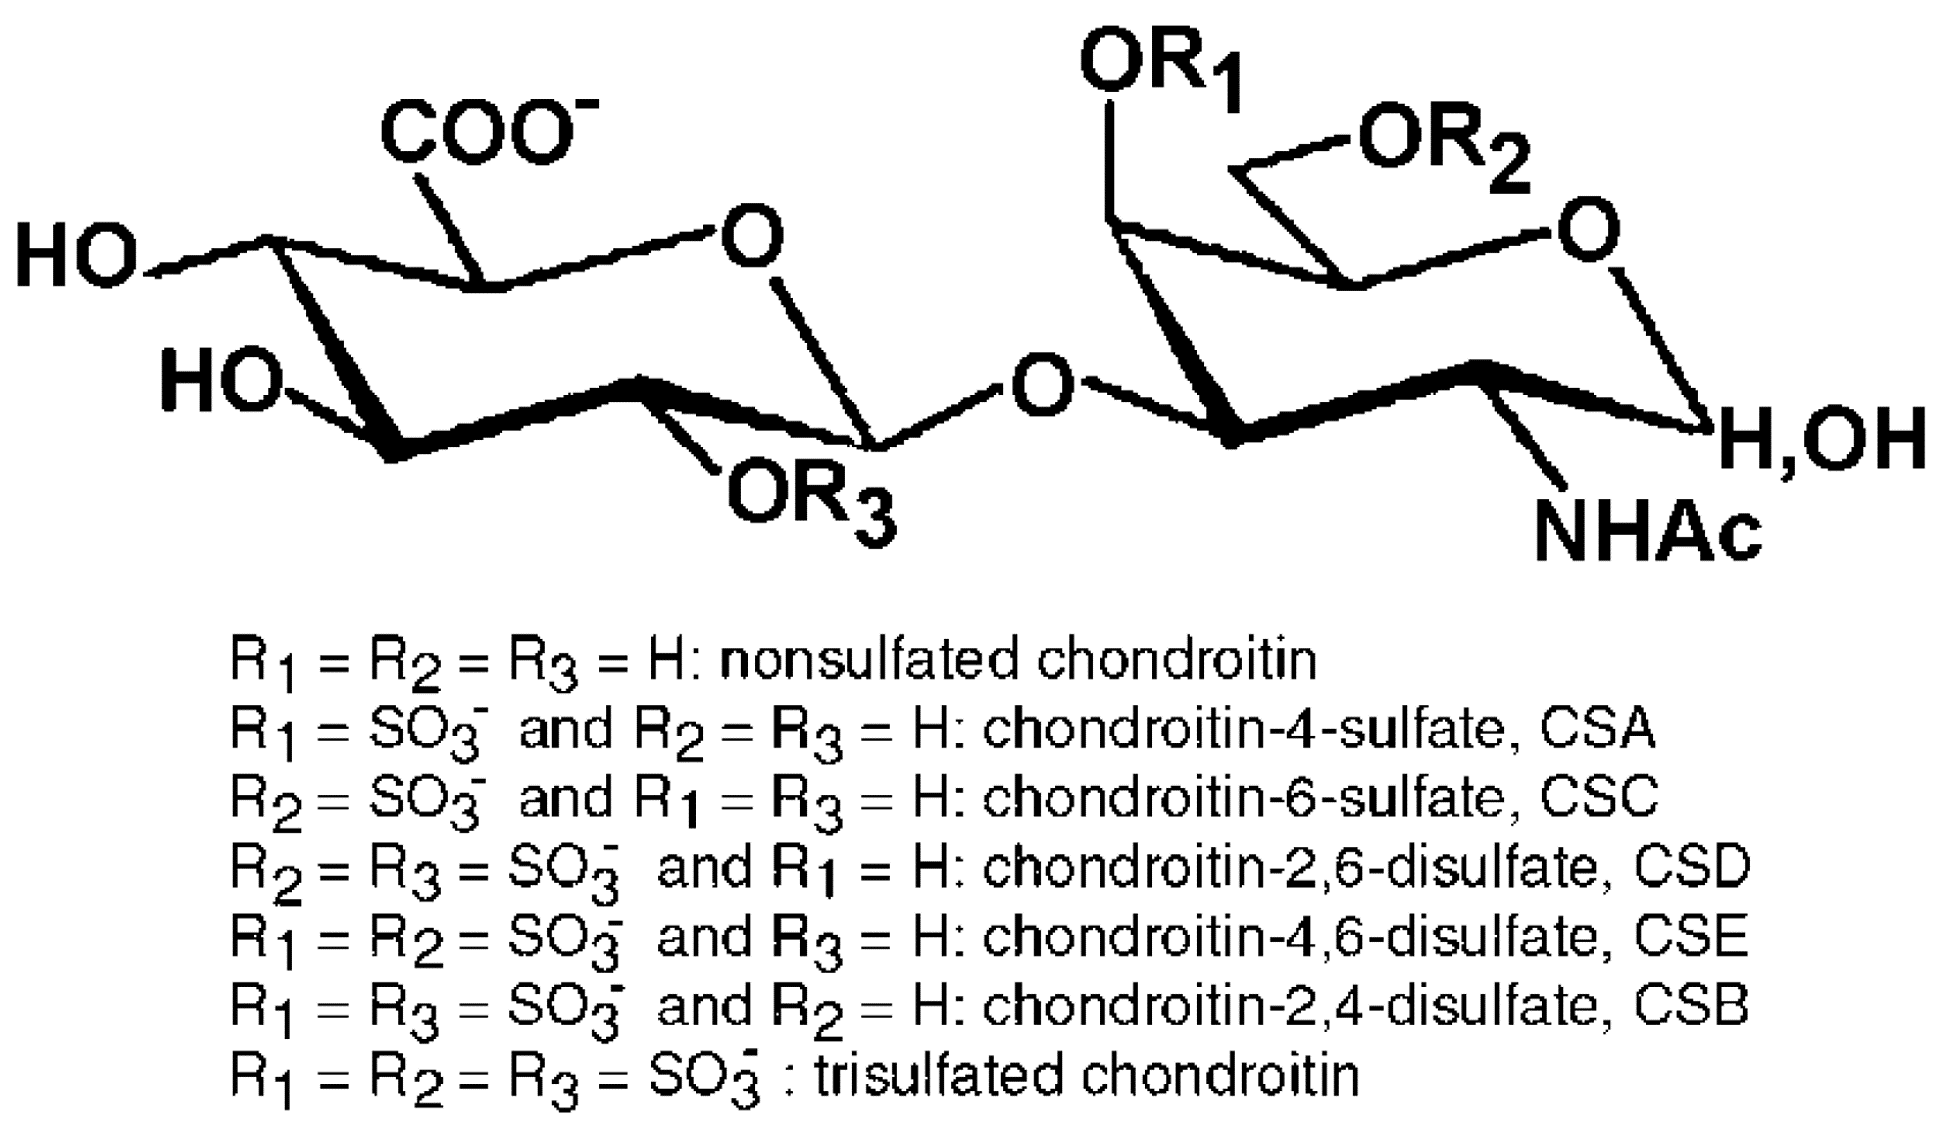 Structure of the disaccharides present in chondroitin sulfate backbone.